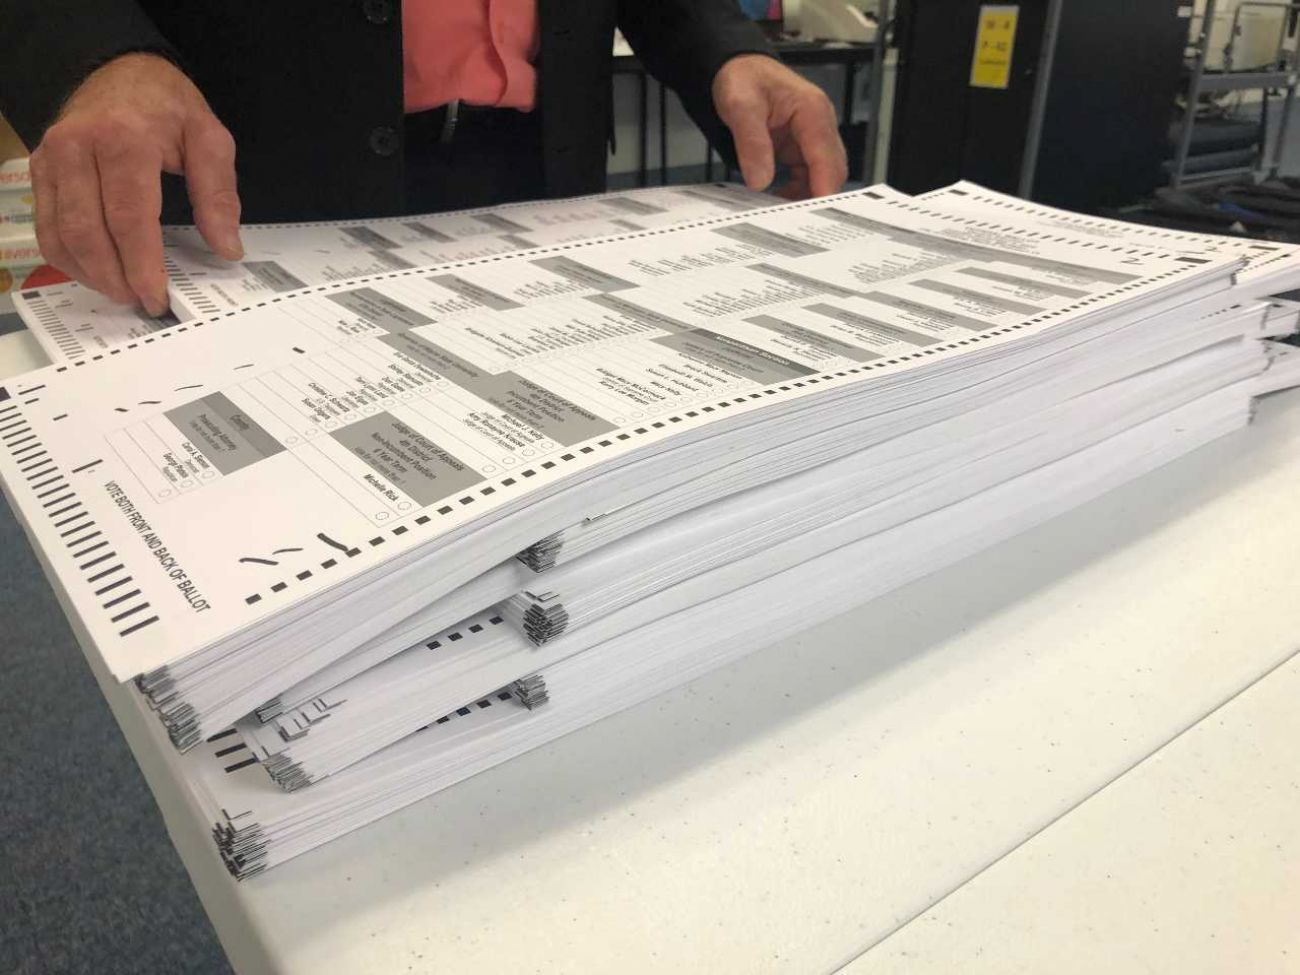 A stack of ballots